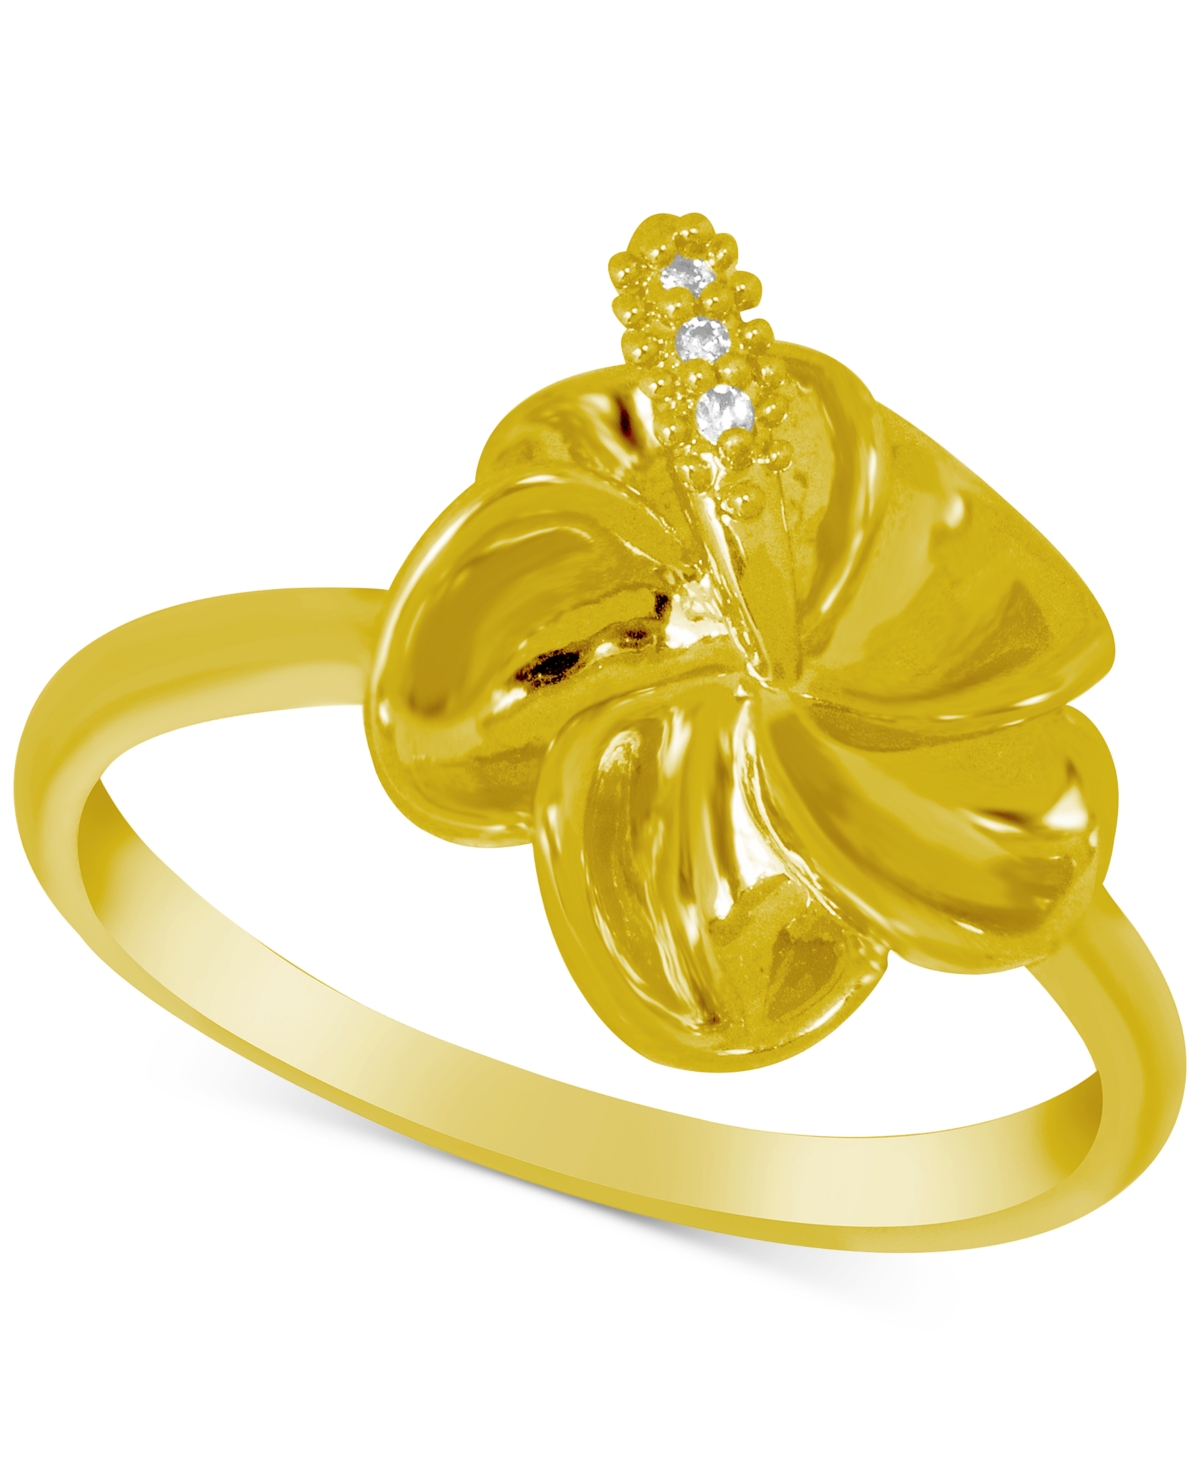 Kona Bay Crystal Accent Flower Ring in Gold-Plate